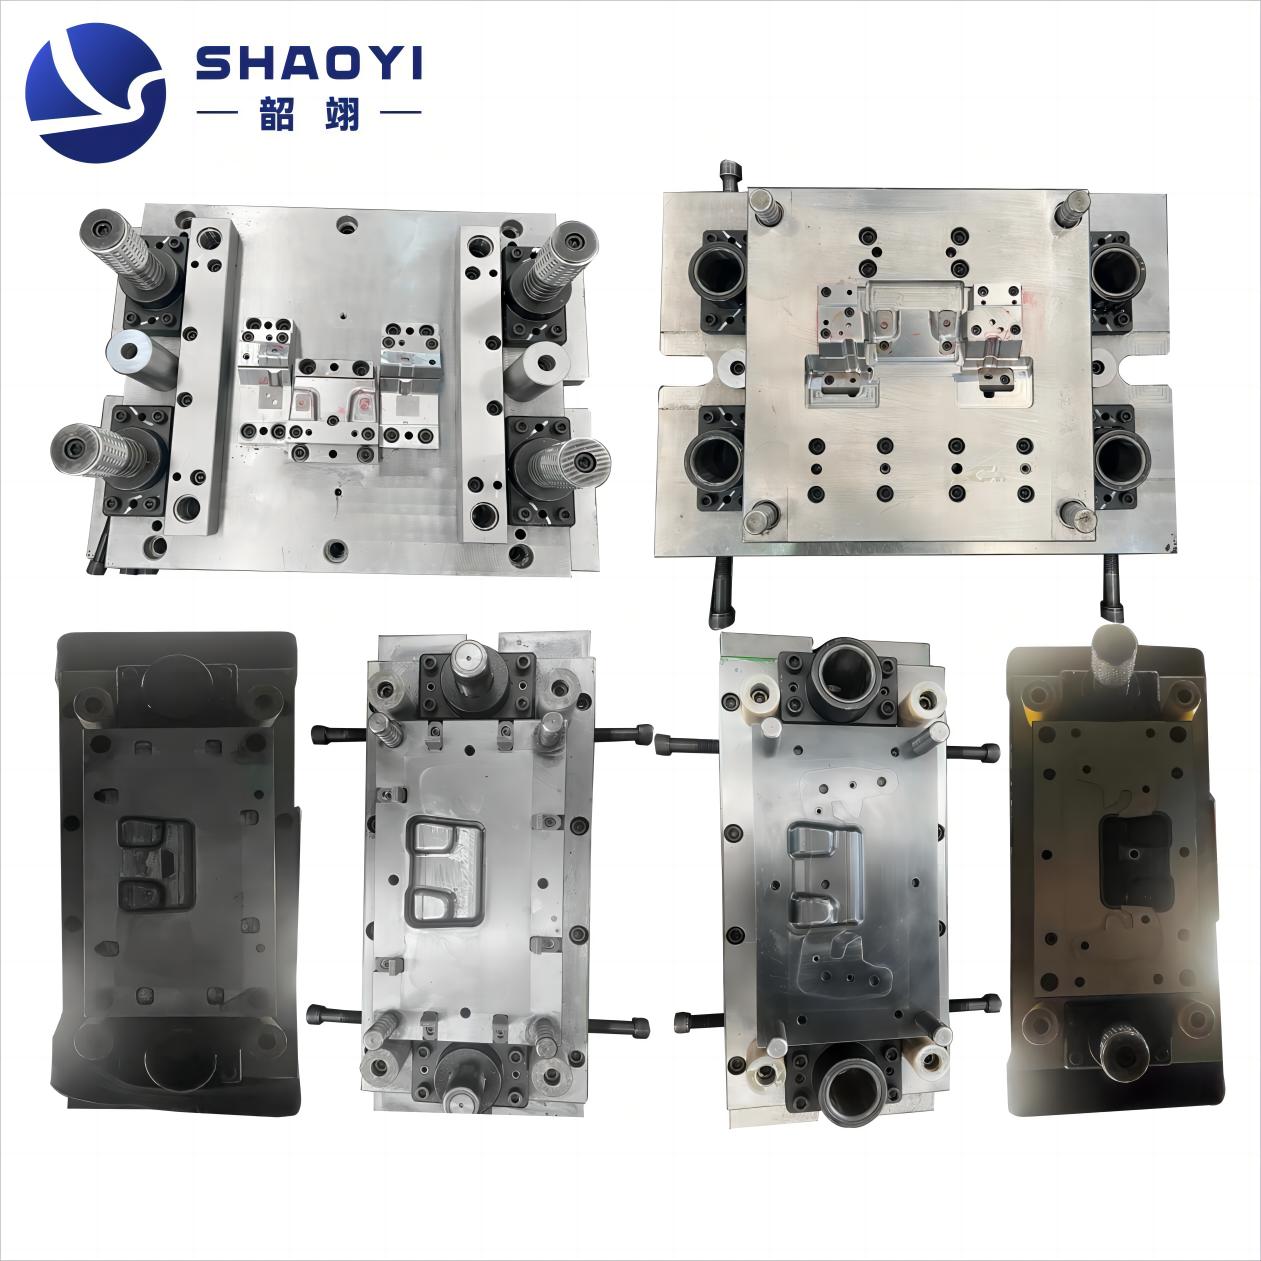 Precision Stamping: Shaoyi’s Single Stamping Die Technology